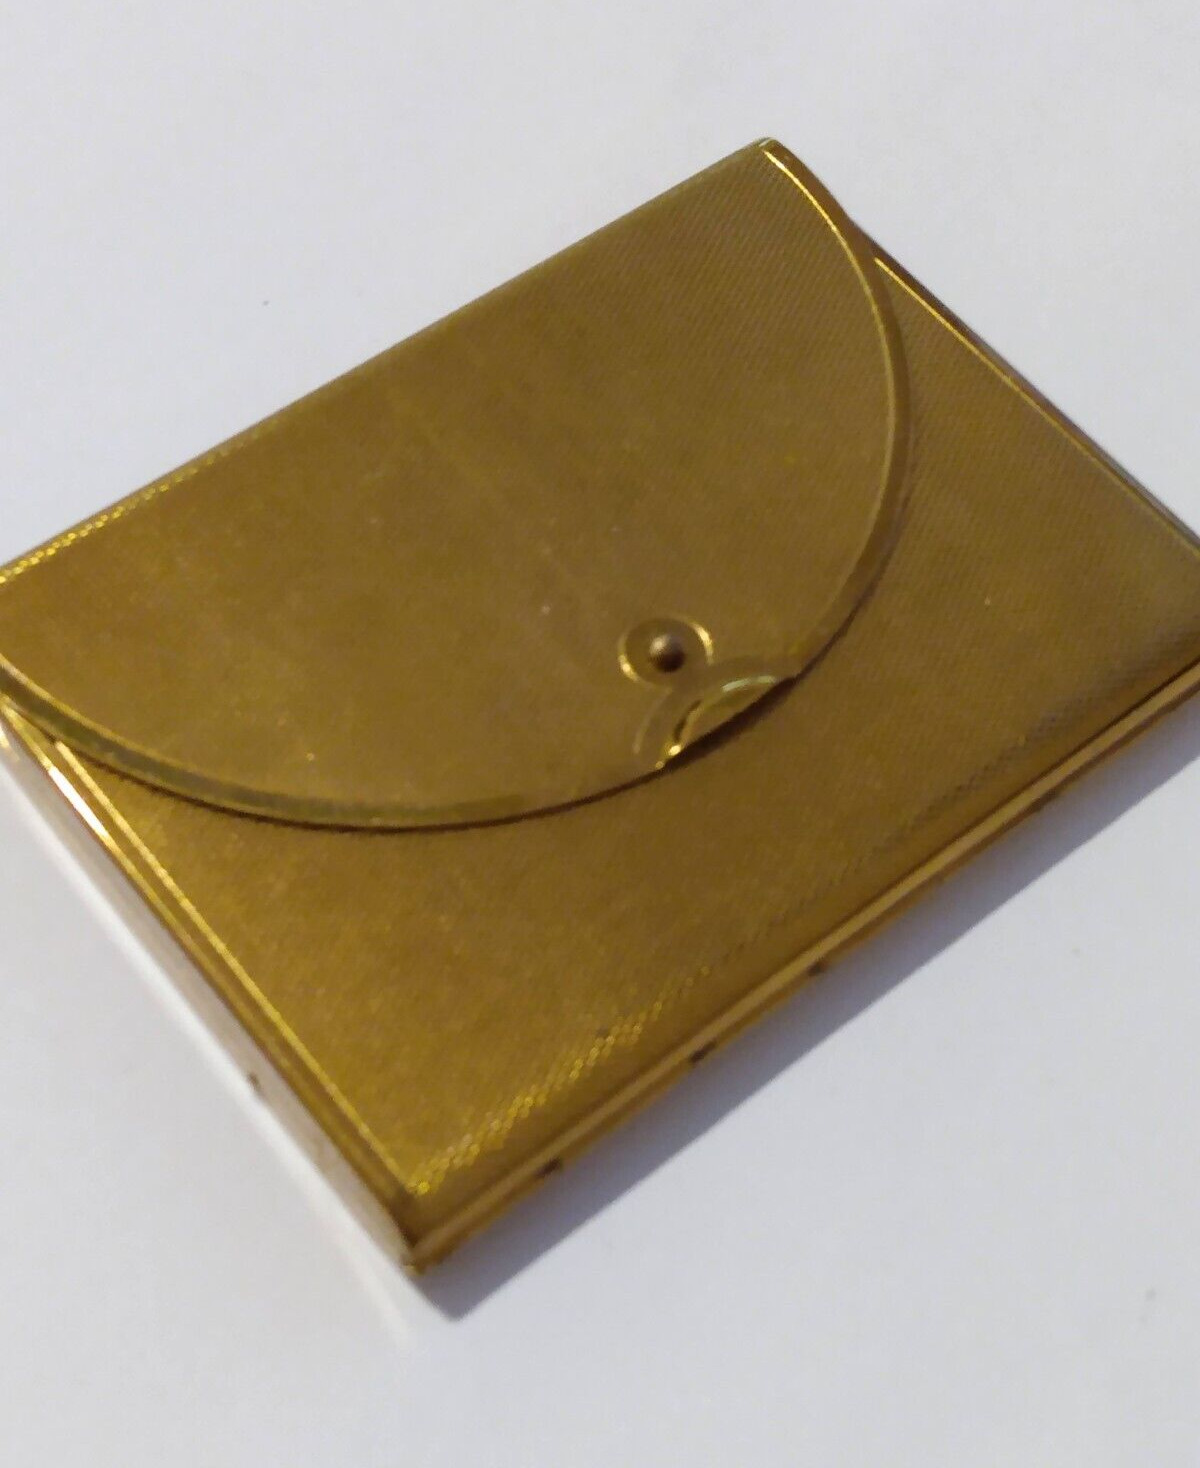 Vintage Coty Gold Tone Compact Makeup Mirror